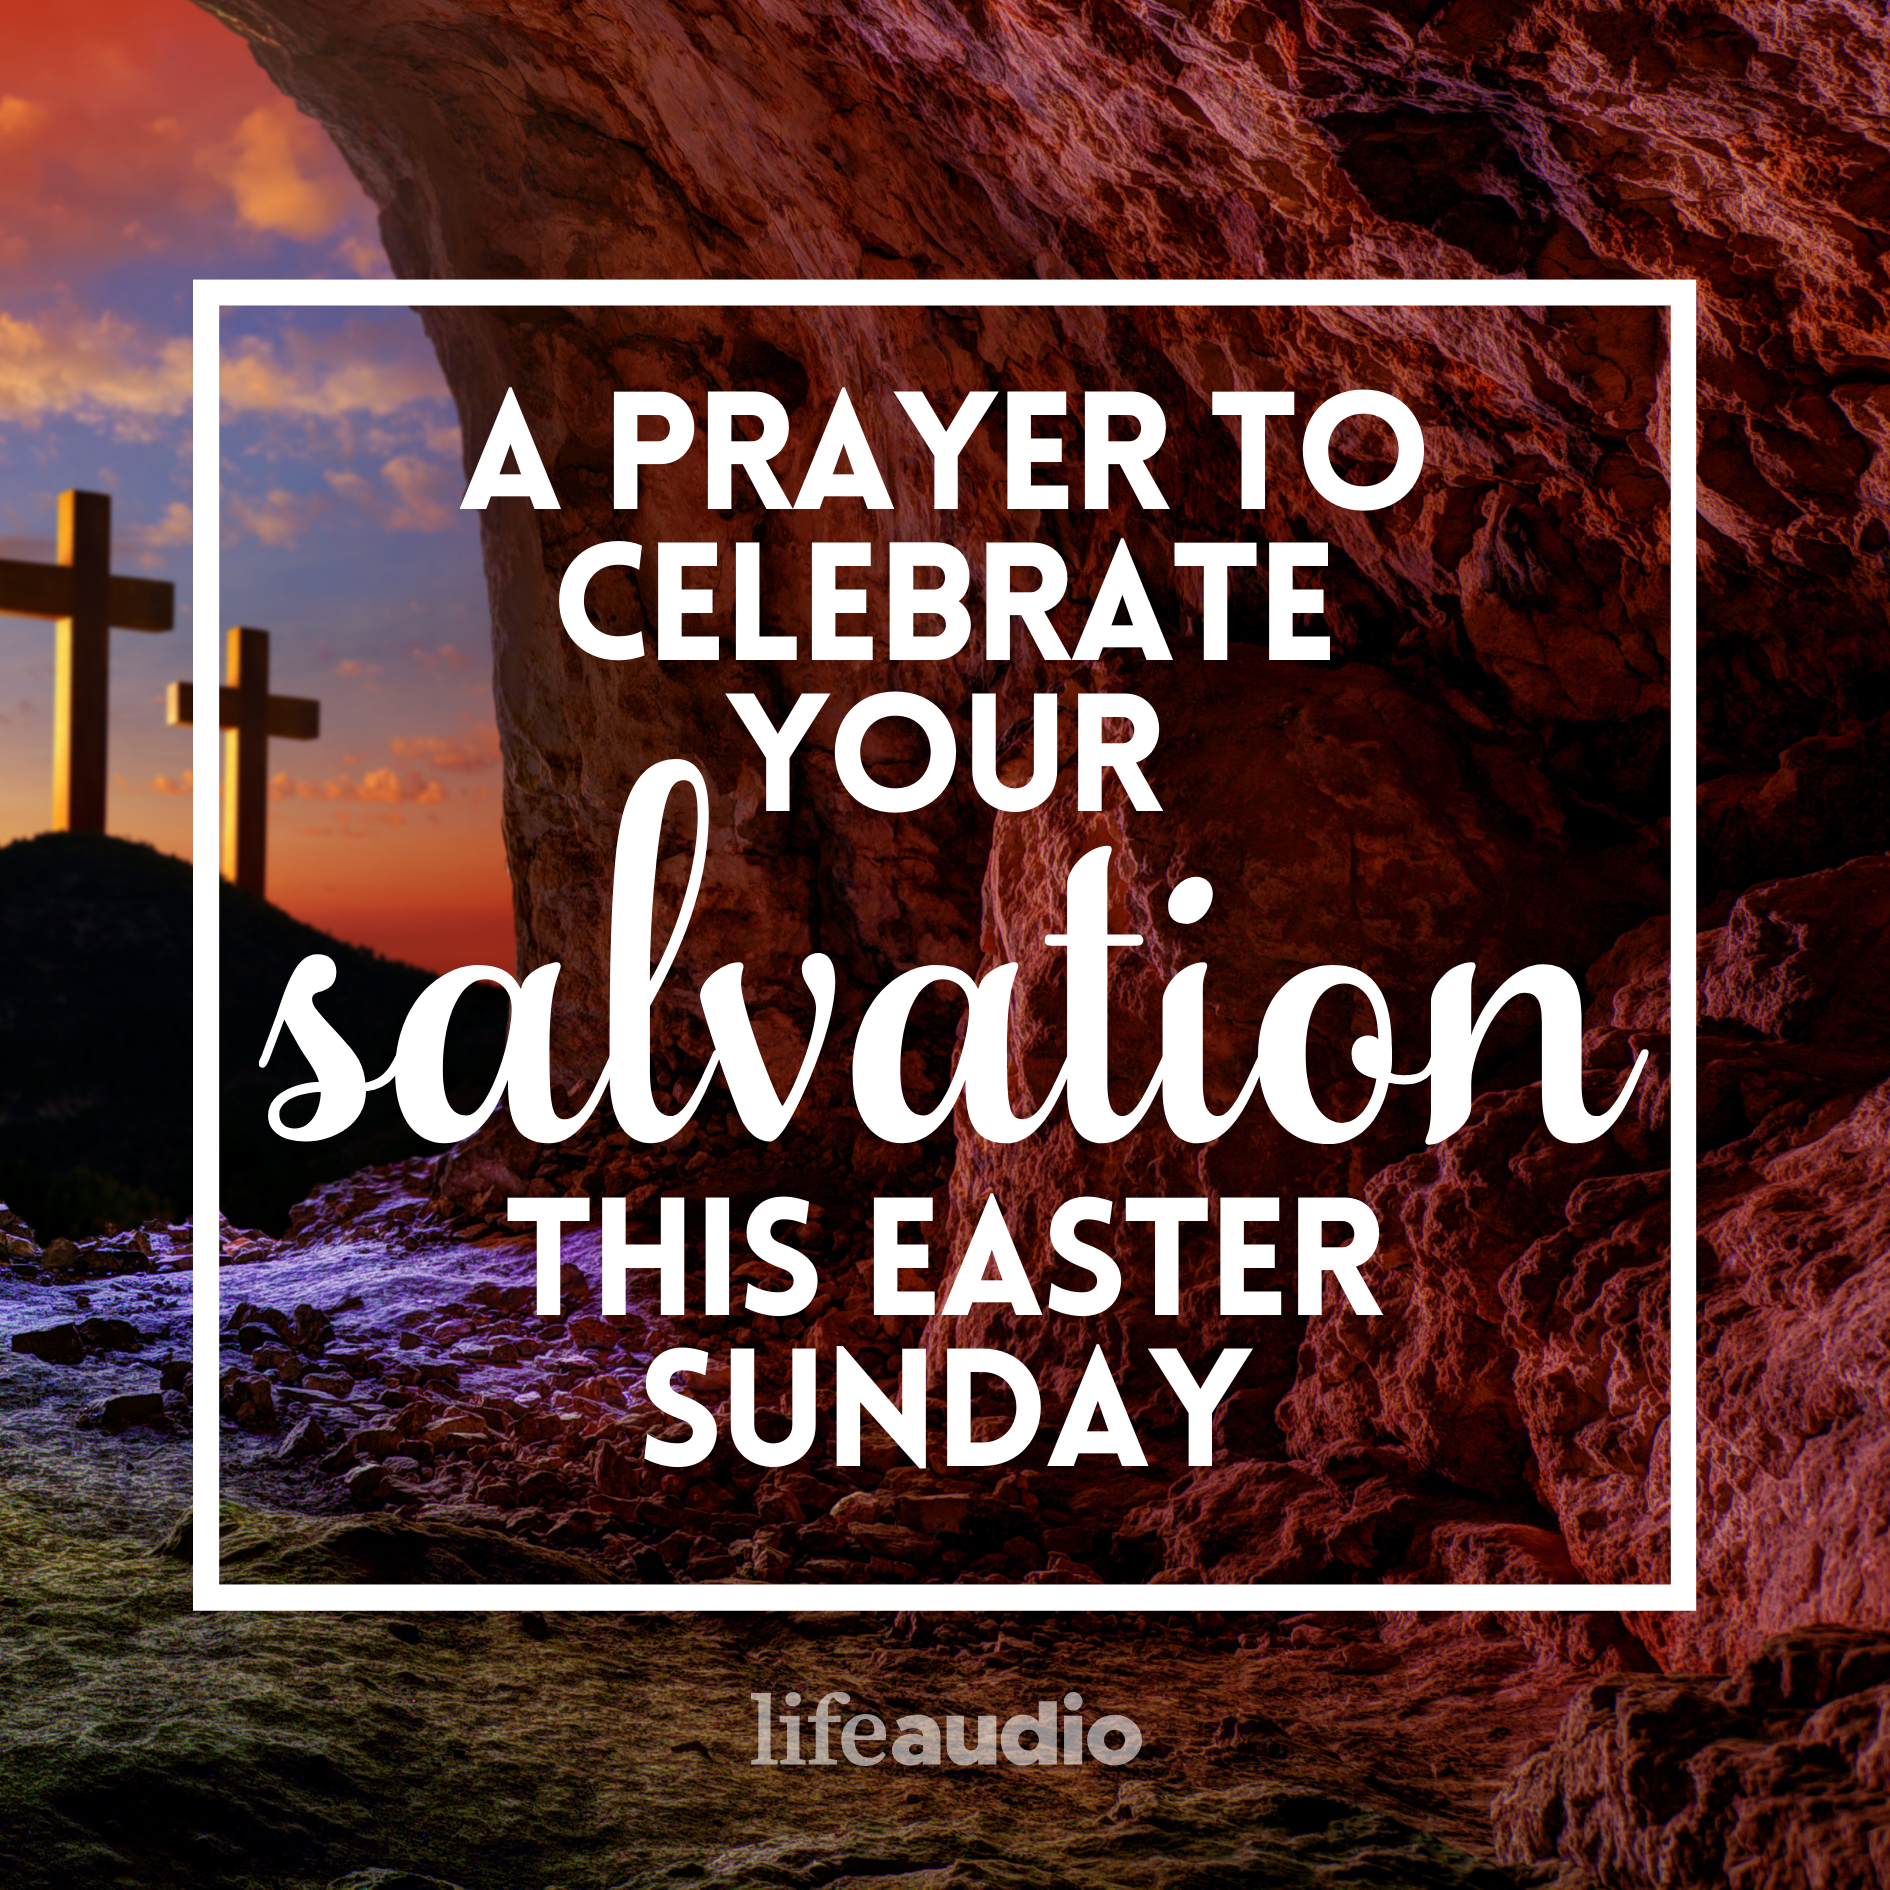 A Prayer to Celebrate Your Salvation this Easter Sunday